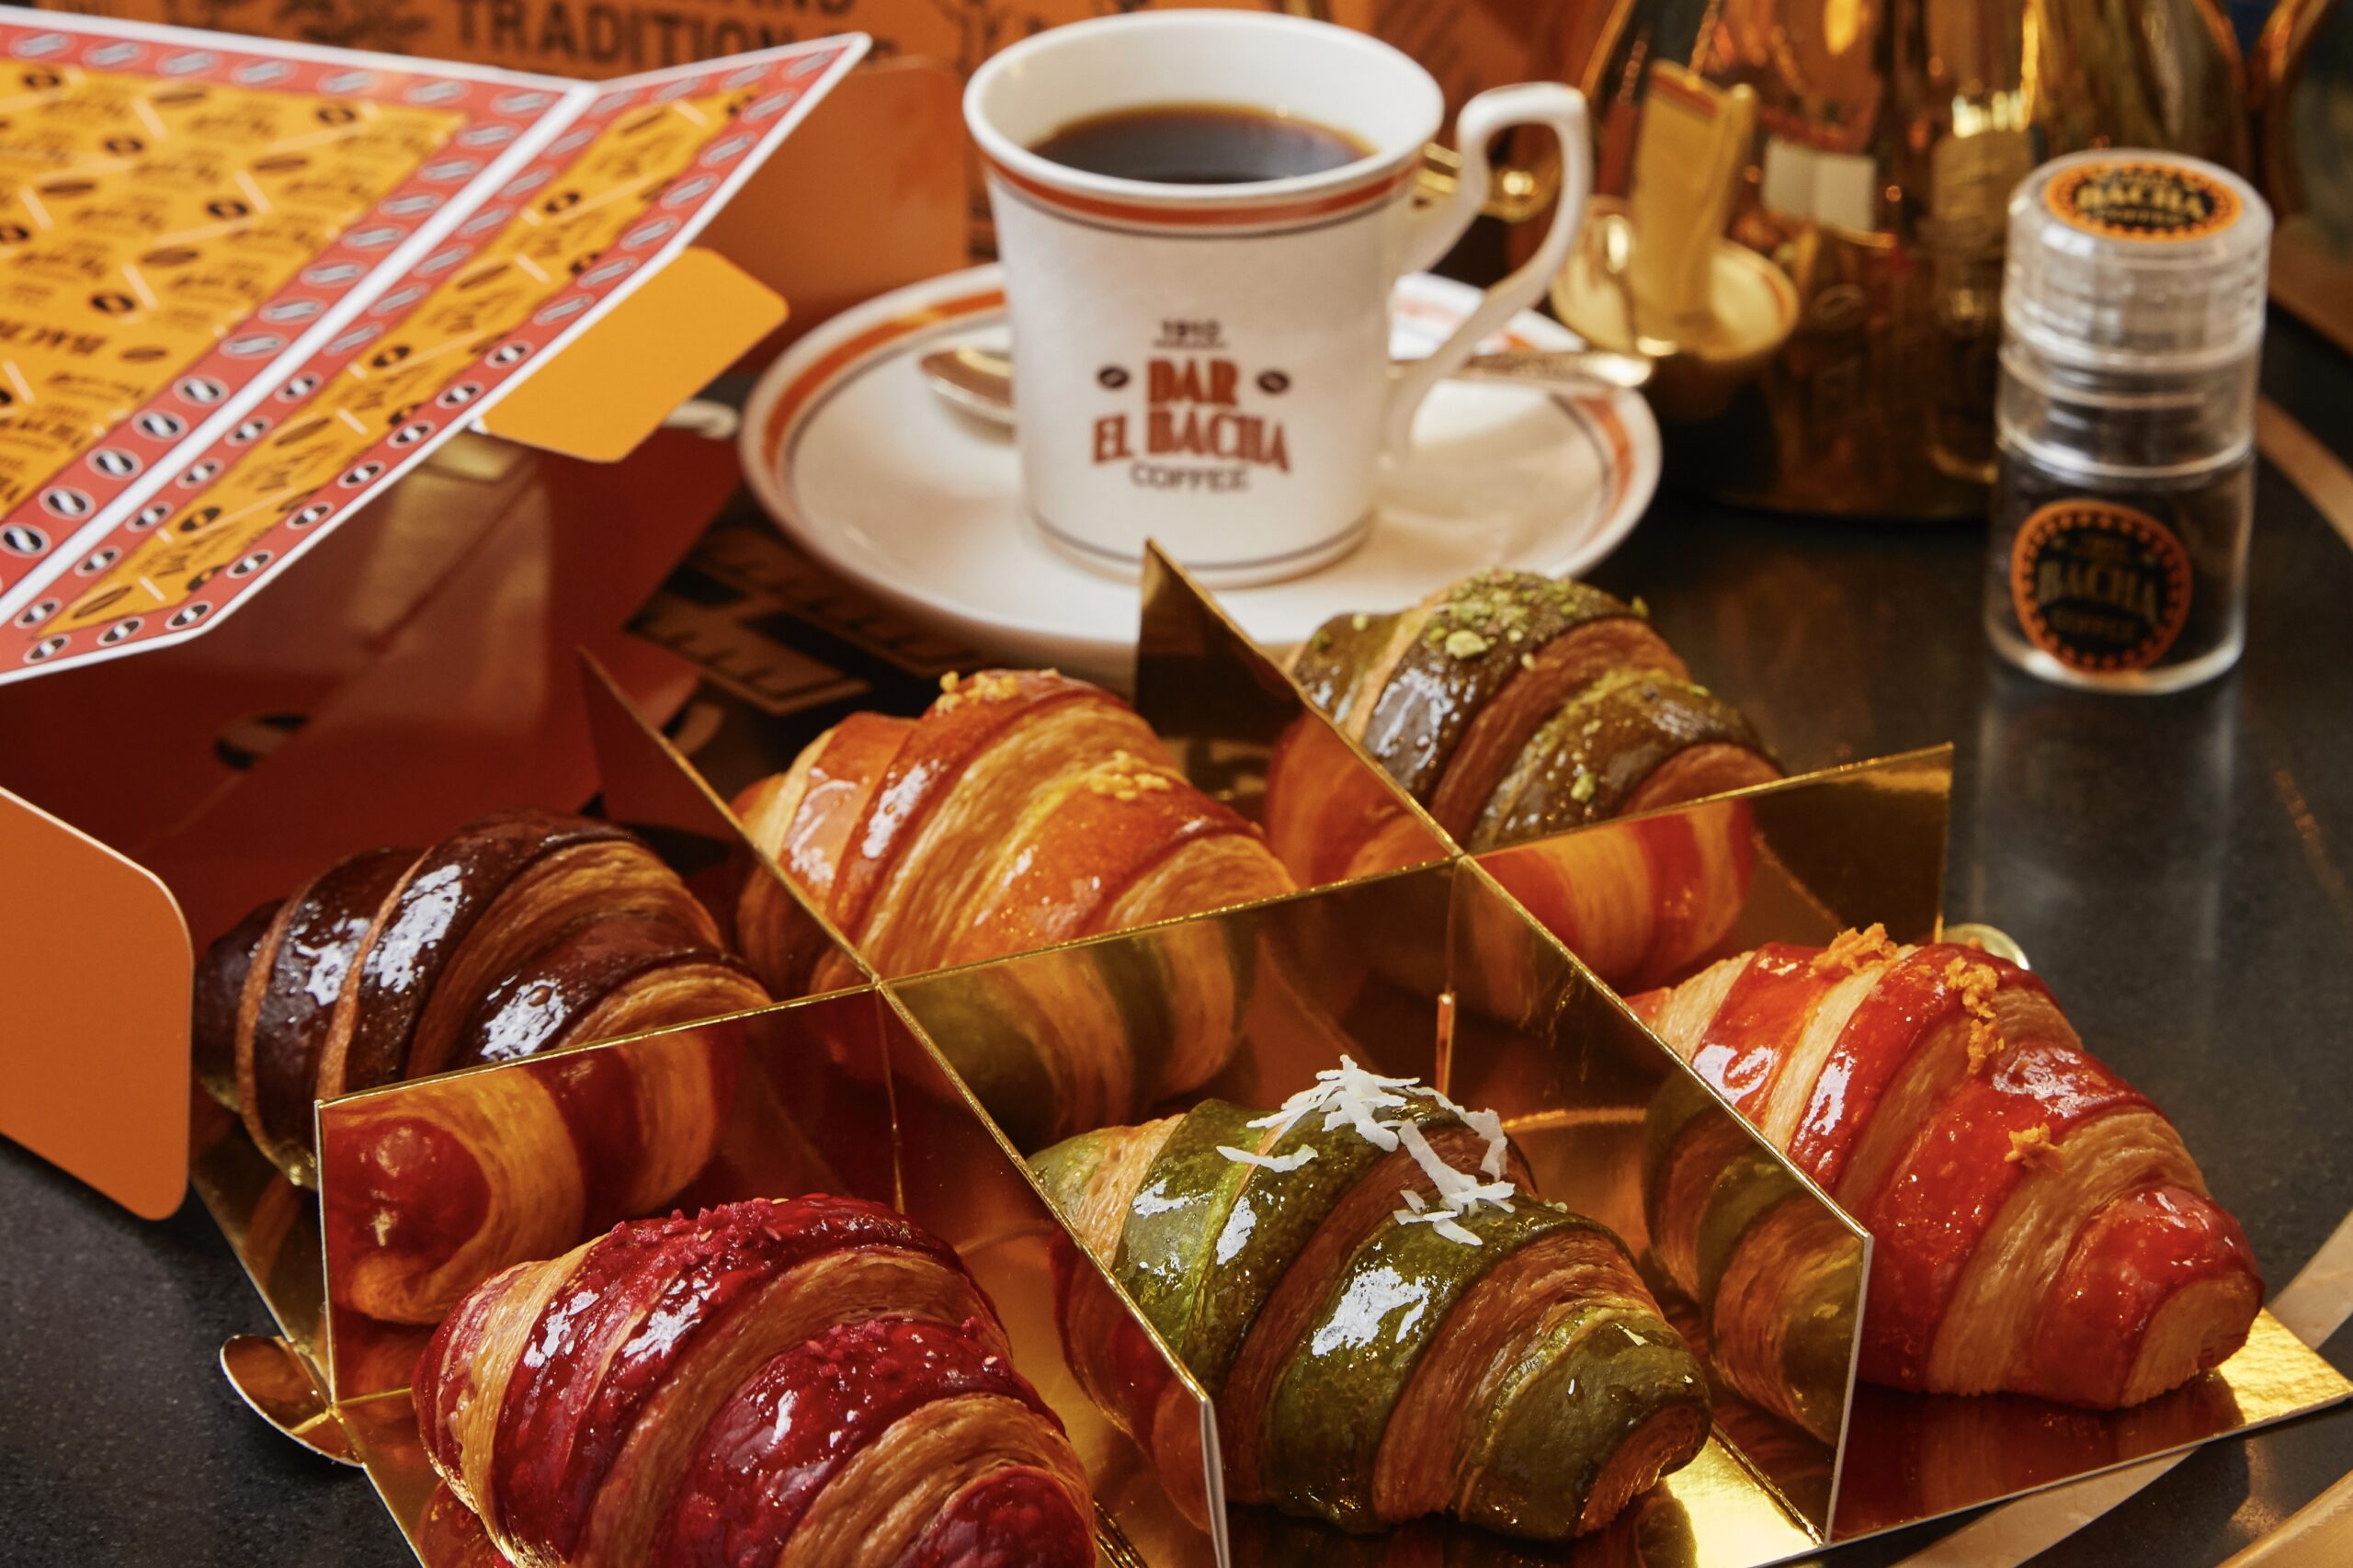 The croissants and coffee sold at Bacha Coffee.